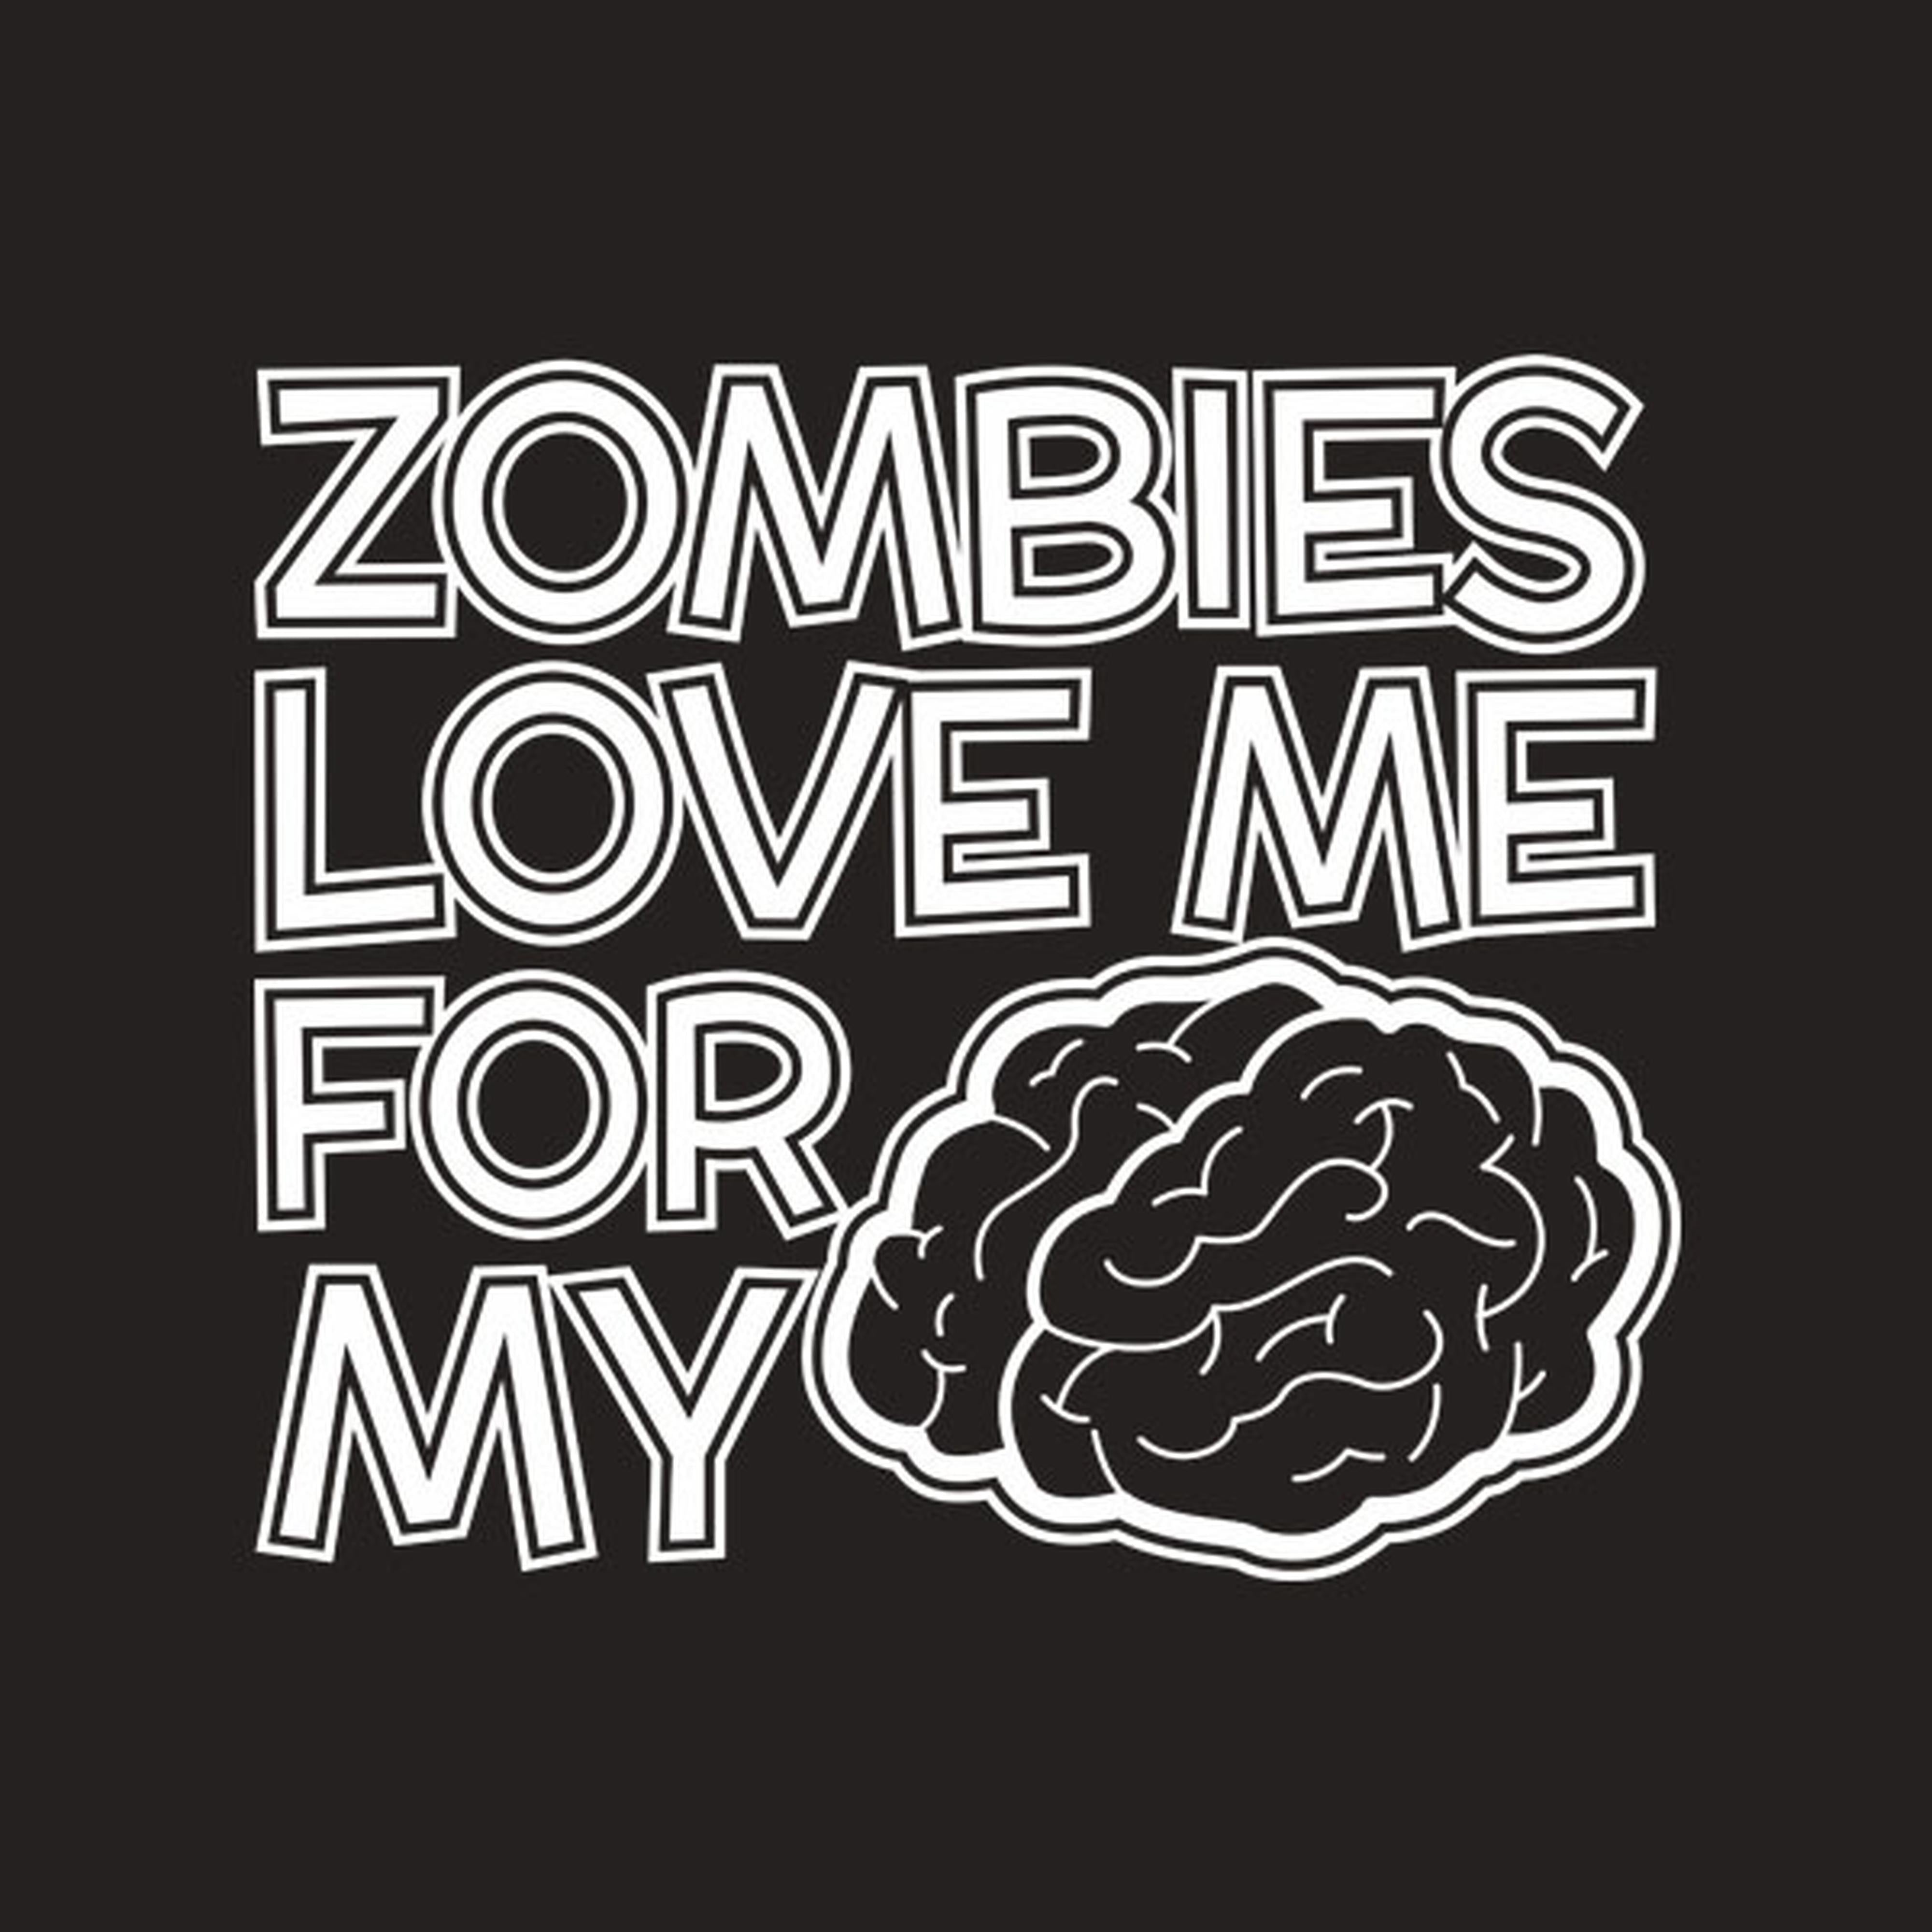 Zombies love me for my brain - T-shirt